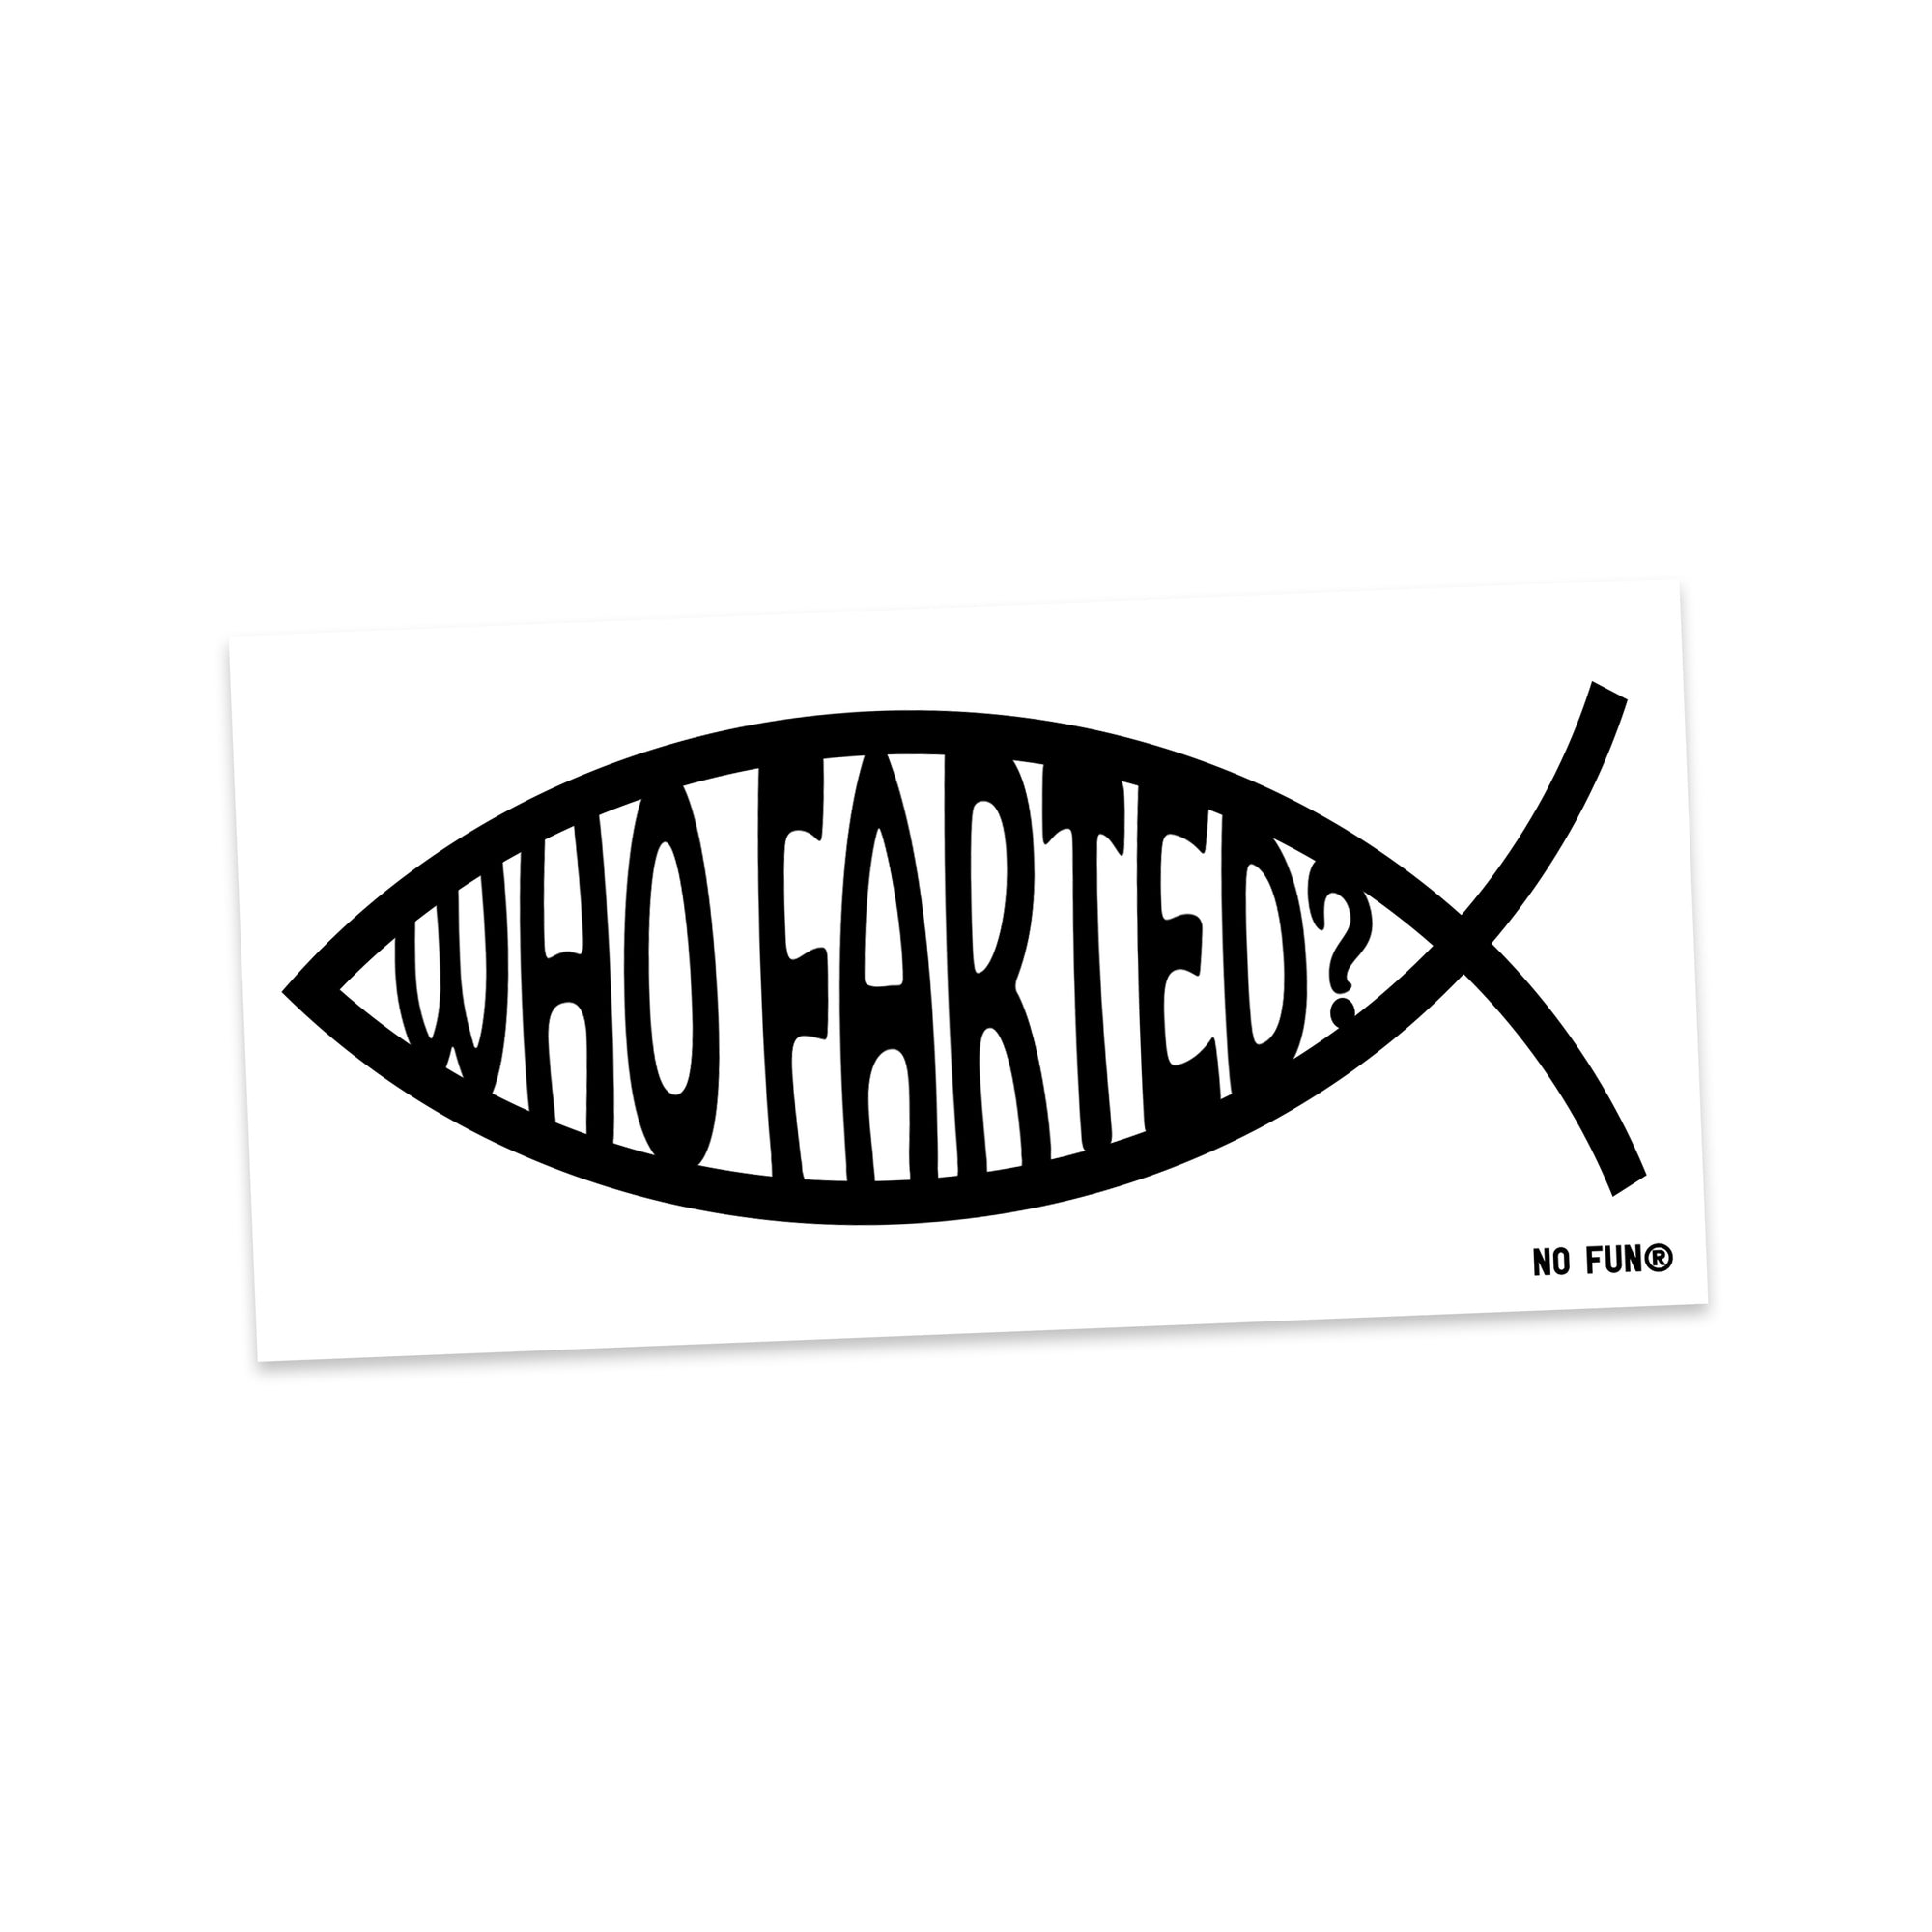 The "Who Farted?" bumper sticker by No Fun®.  Sticker is white with the phrase "Who Farted?" inside of a fish, printed with black ink.  The design resembles that of a traditional Jesus Fish.  There is a small No Fun® logo in the bottom right hand corner of the product.